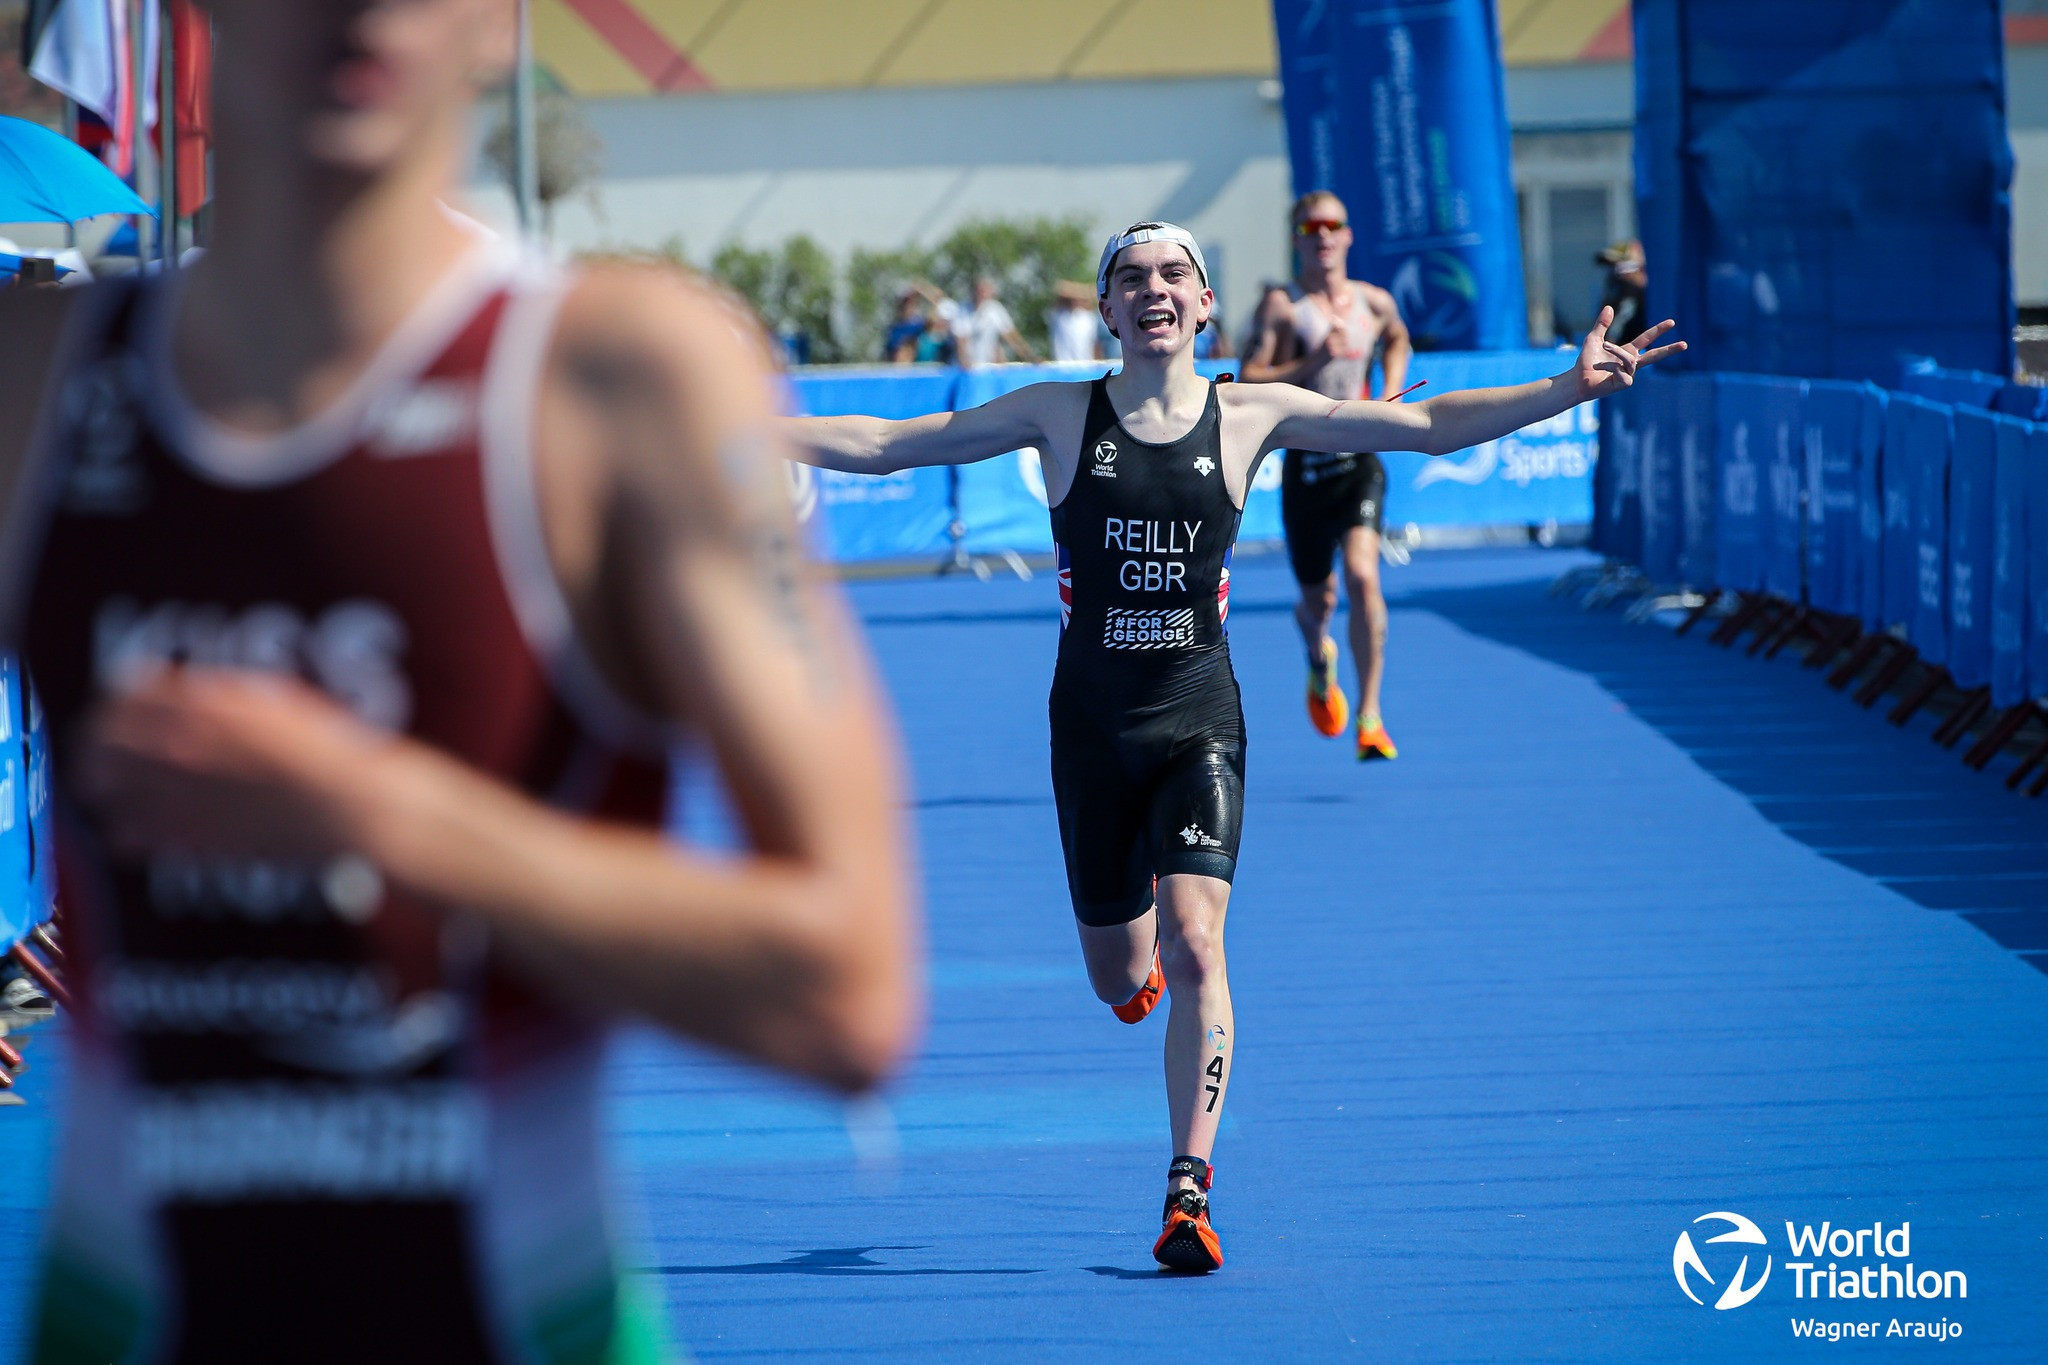 There was further podium success for Britain, with Hamish Reilly taking third place in the men's under-23 event ©World Triathlon